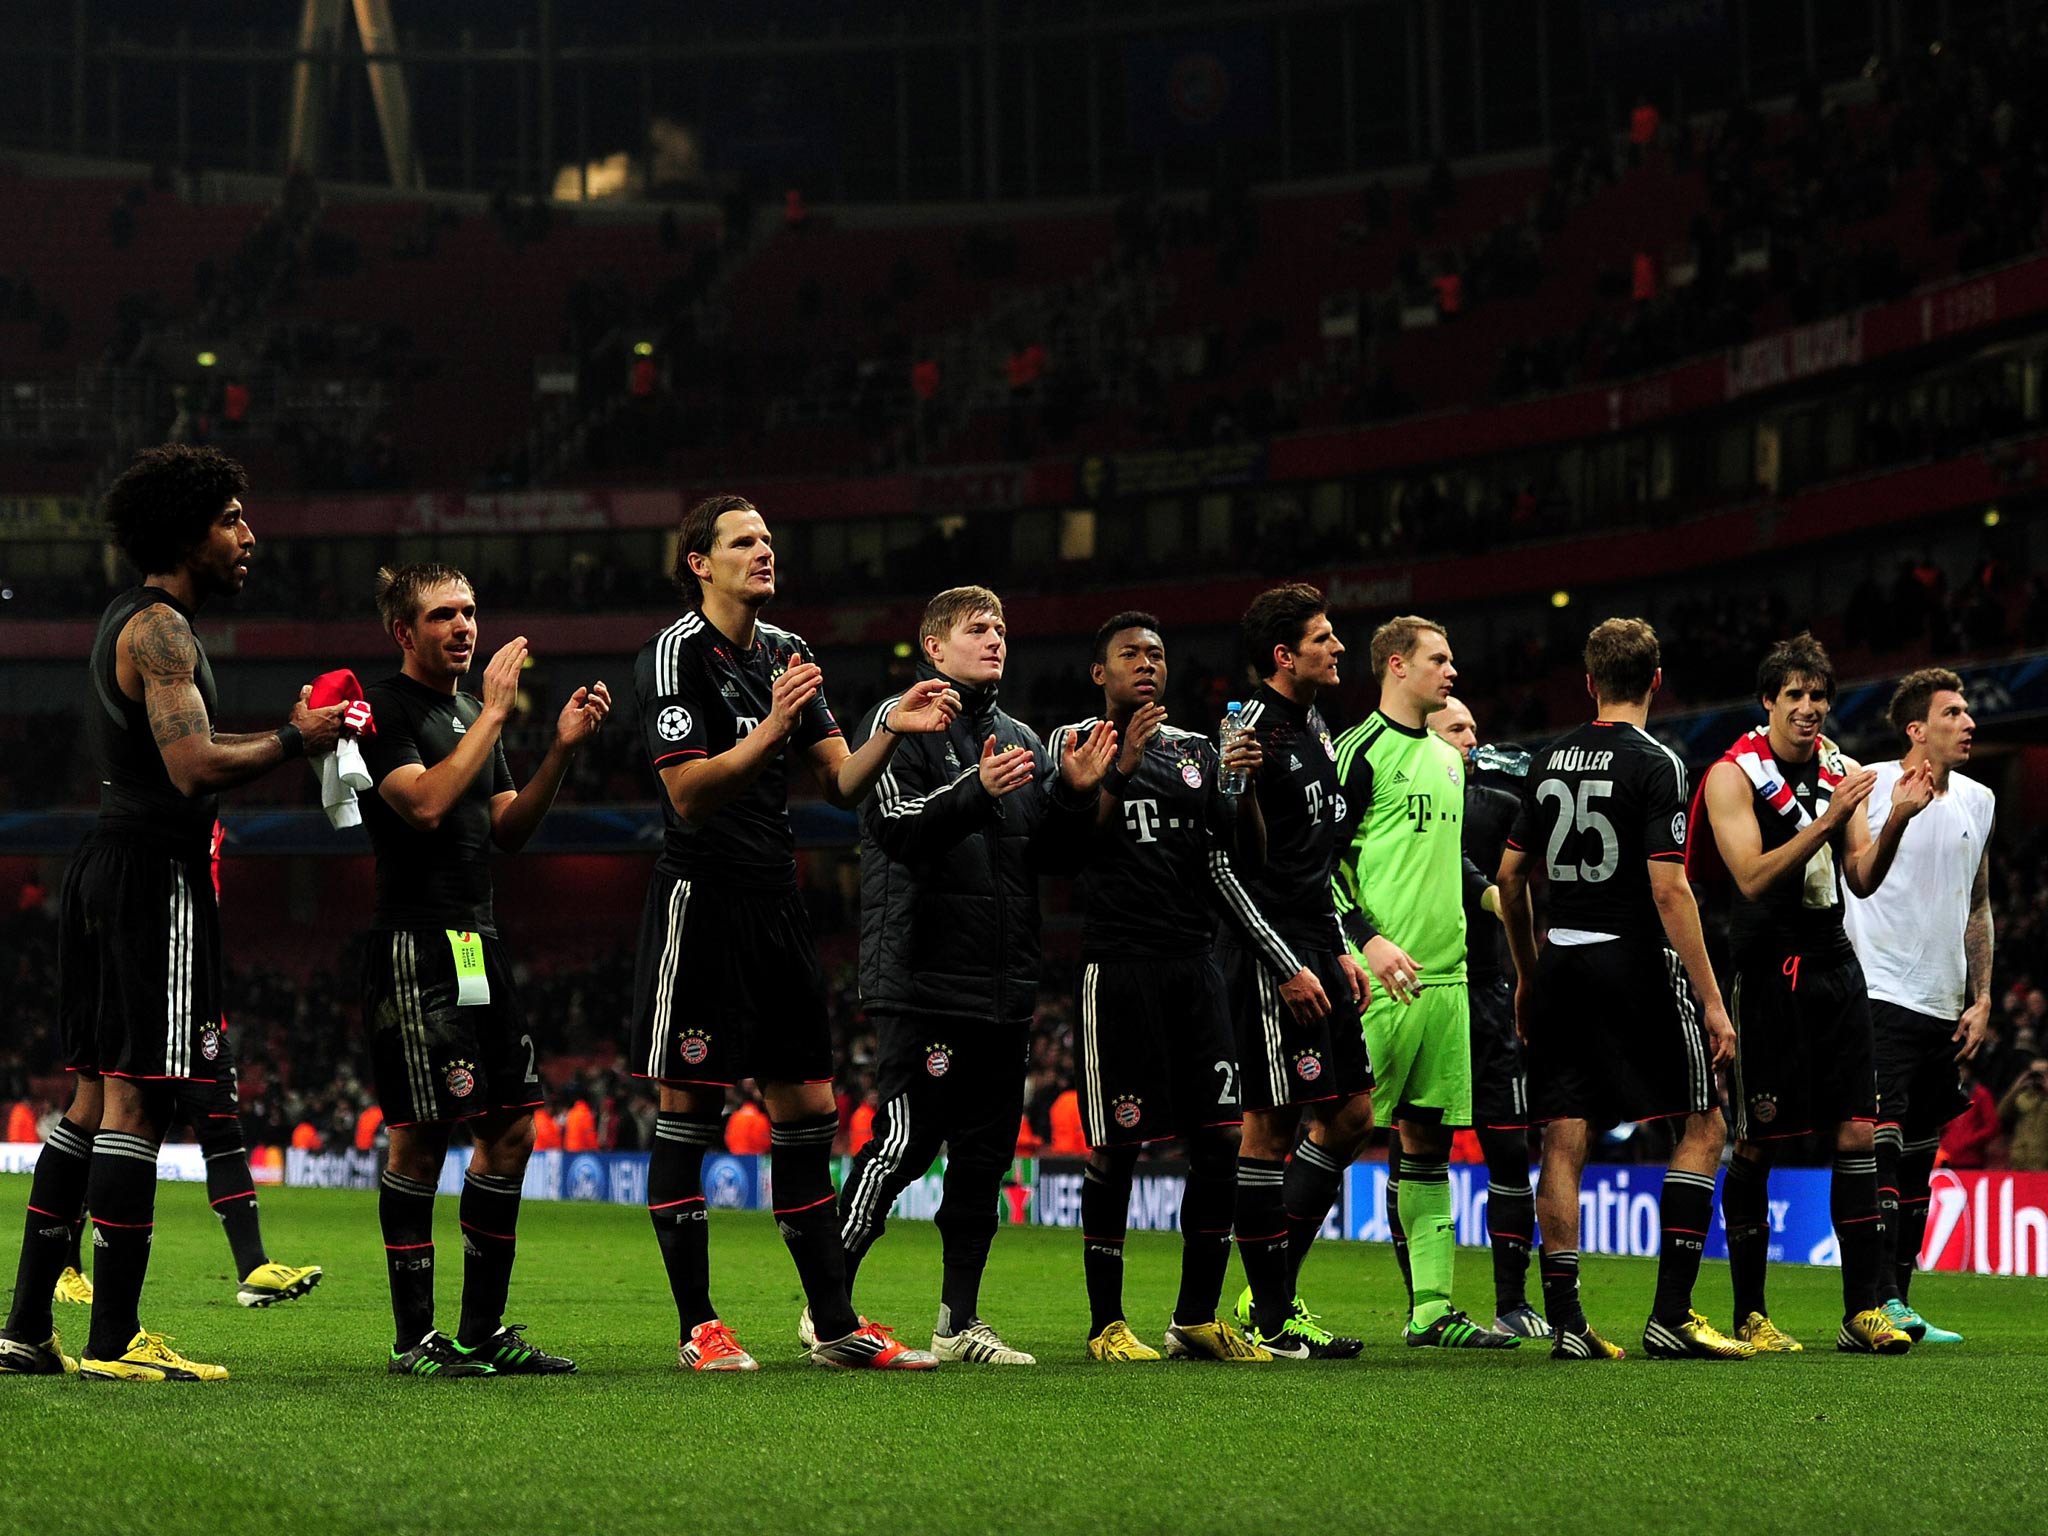 The Bayern Munich team acknowledge their fans after the victory over Arsenal